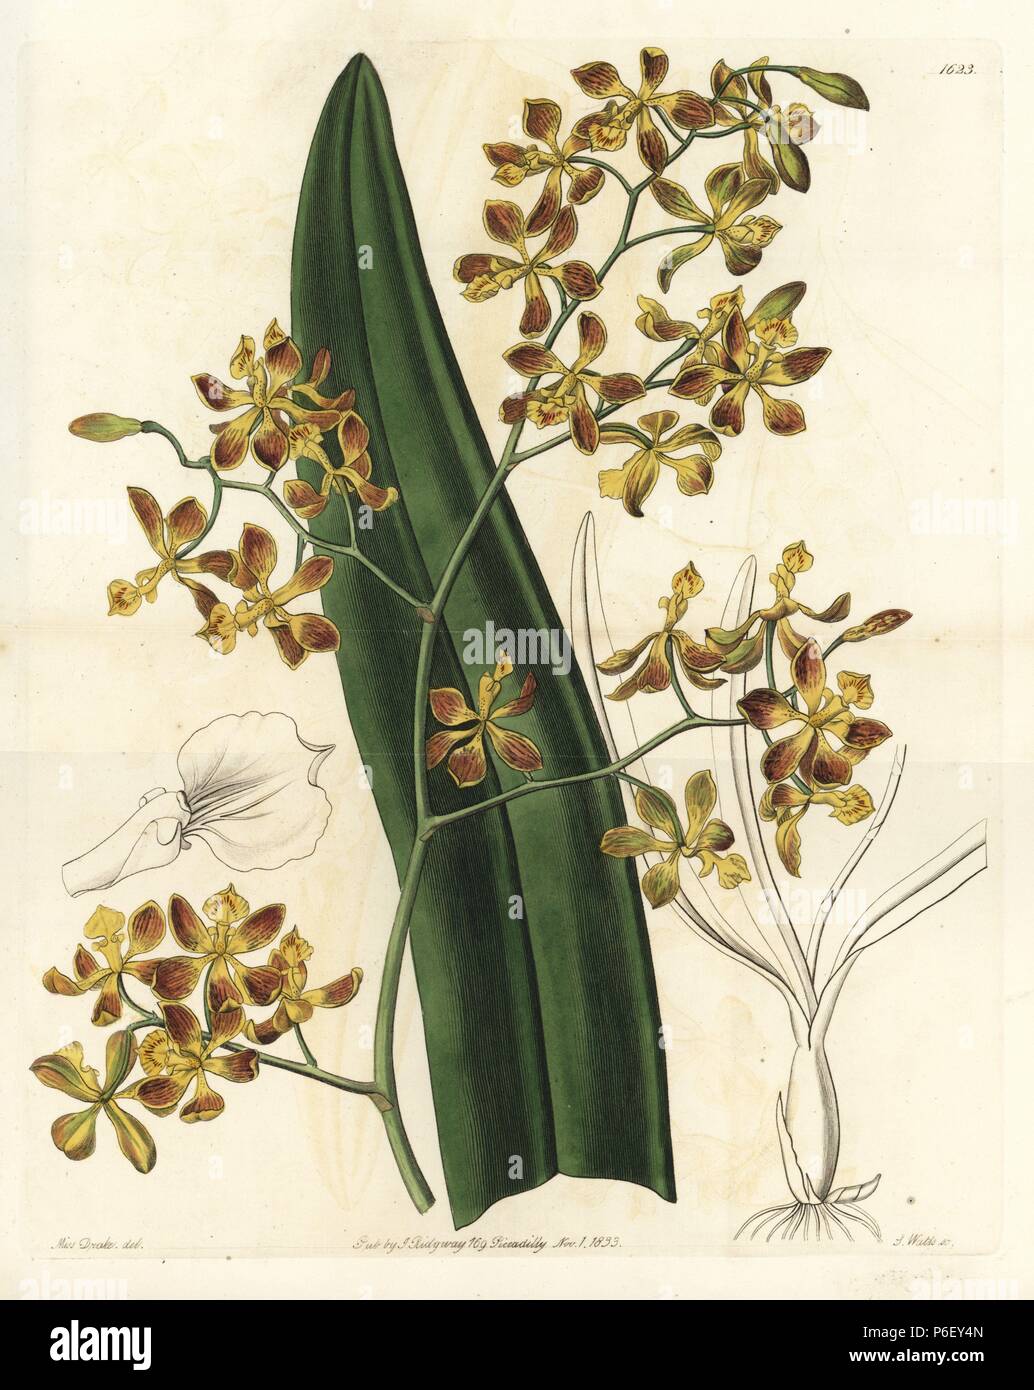 Encyclia oncidioides orchid (Oncidium-flowered epidendrum, Epidendrum oncidiodes). Handcoloured copperplate engraving by S. Watts after an illustration by Miss Drake from Sydenham Edwards' 'The Botanical Register,' London, Ridgway, 1833. Sarah Anne Drake (1803-1857) drew over 1,300 plates for the botanist John Lindley, including many orchids. Stock Photo